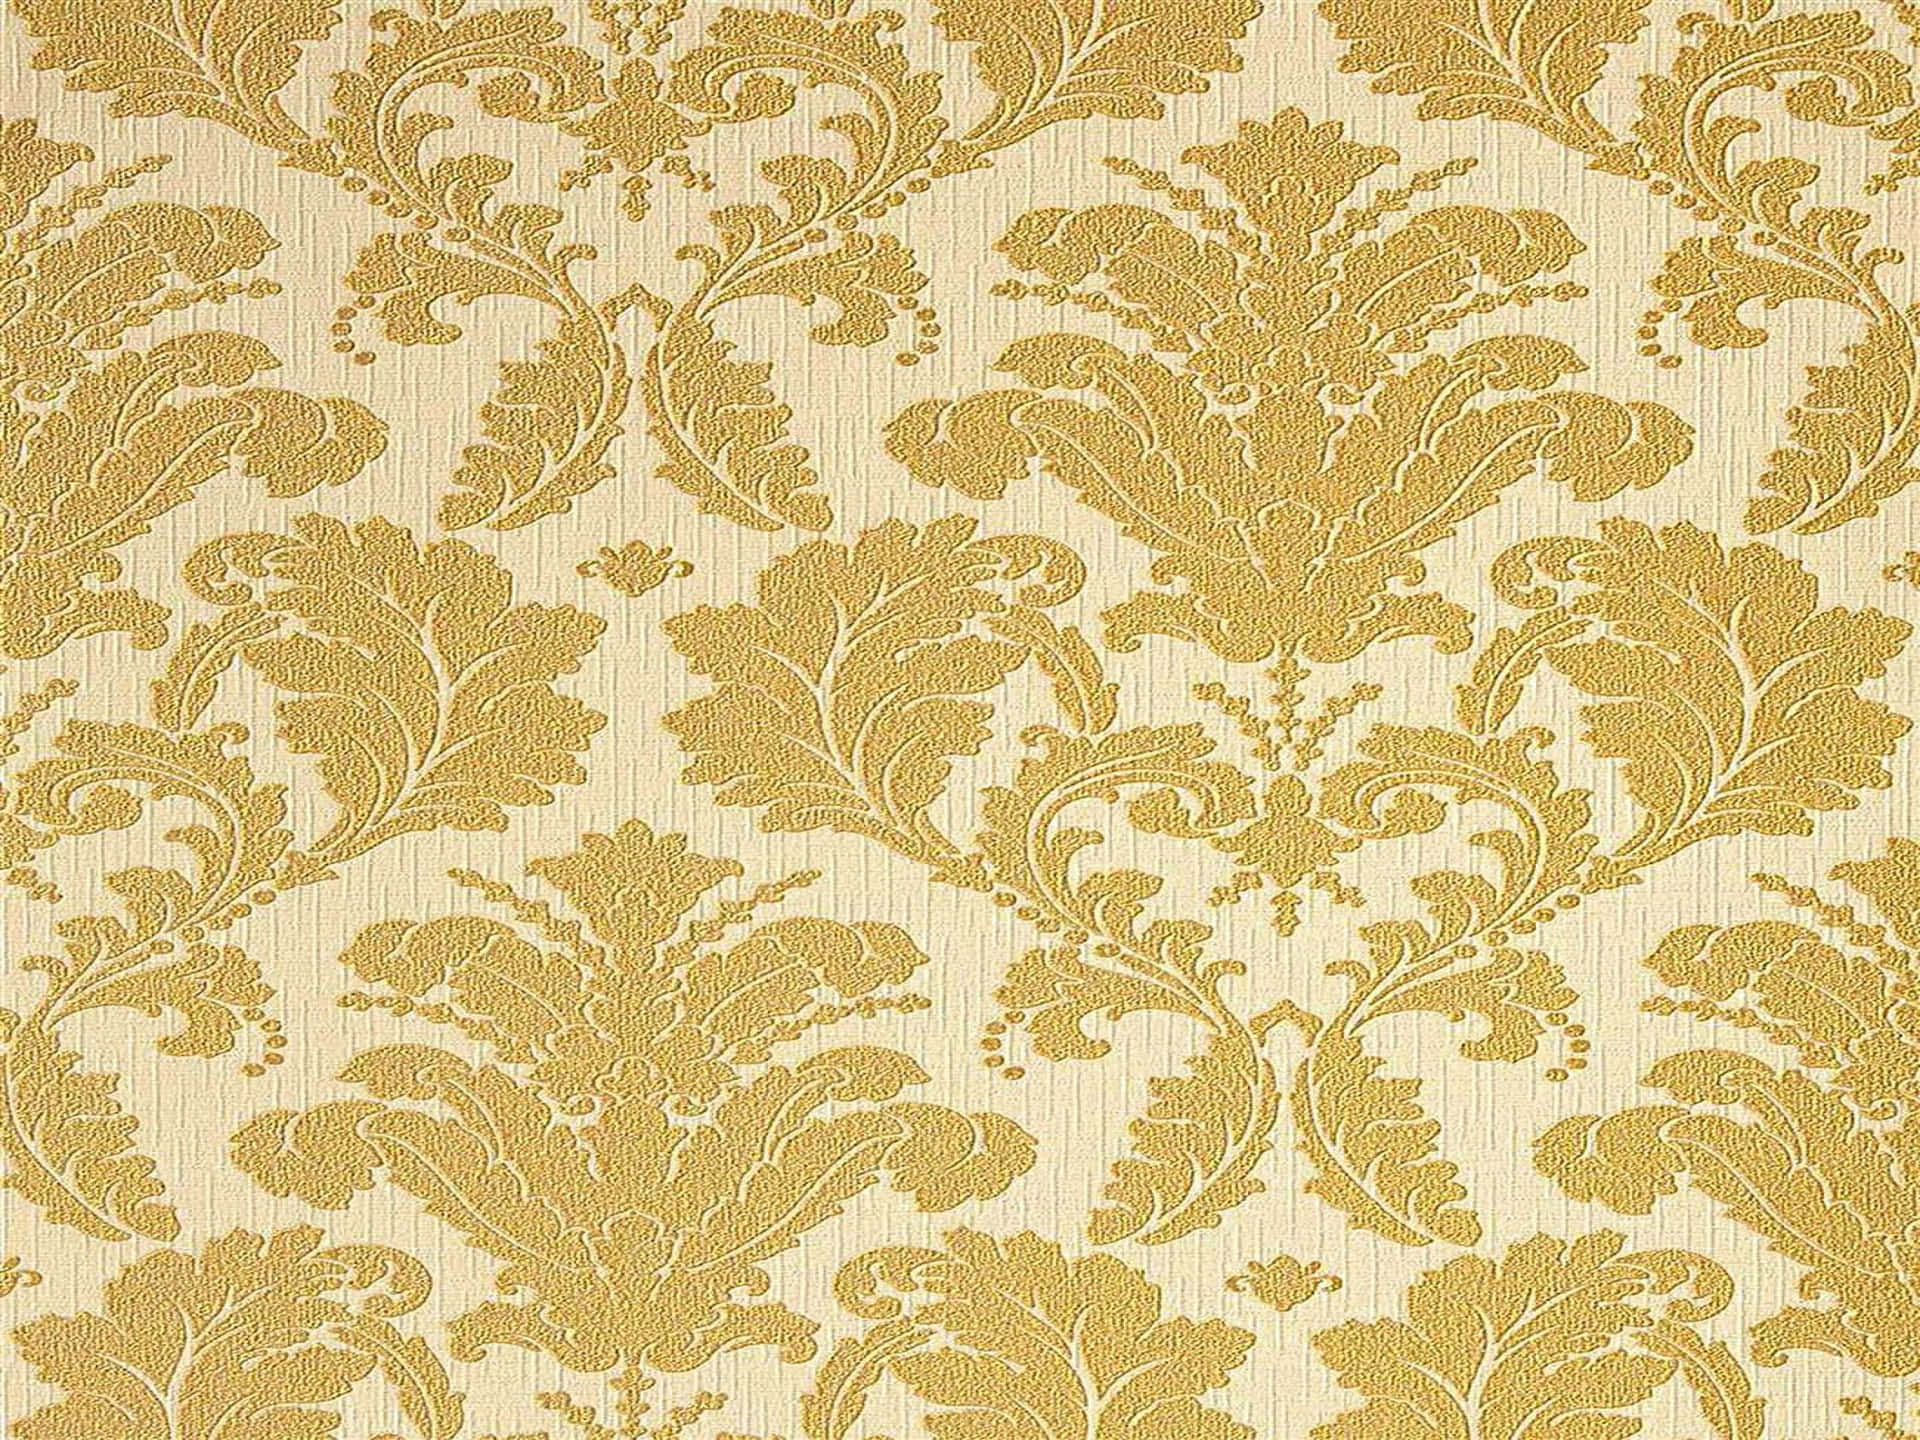 A captivating gold and white pattern